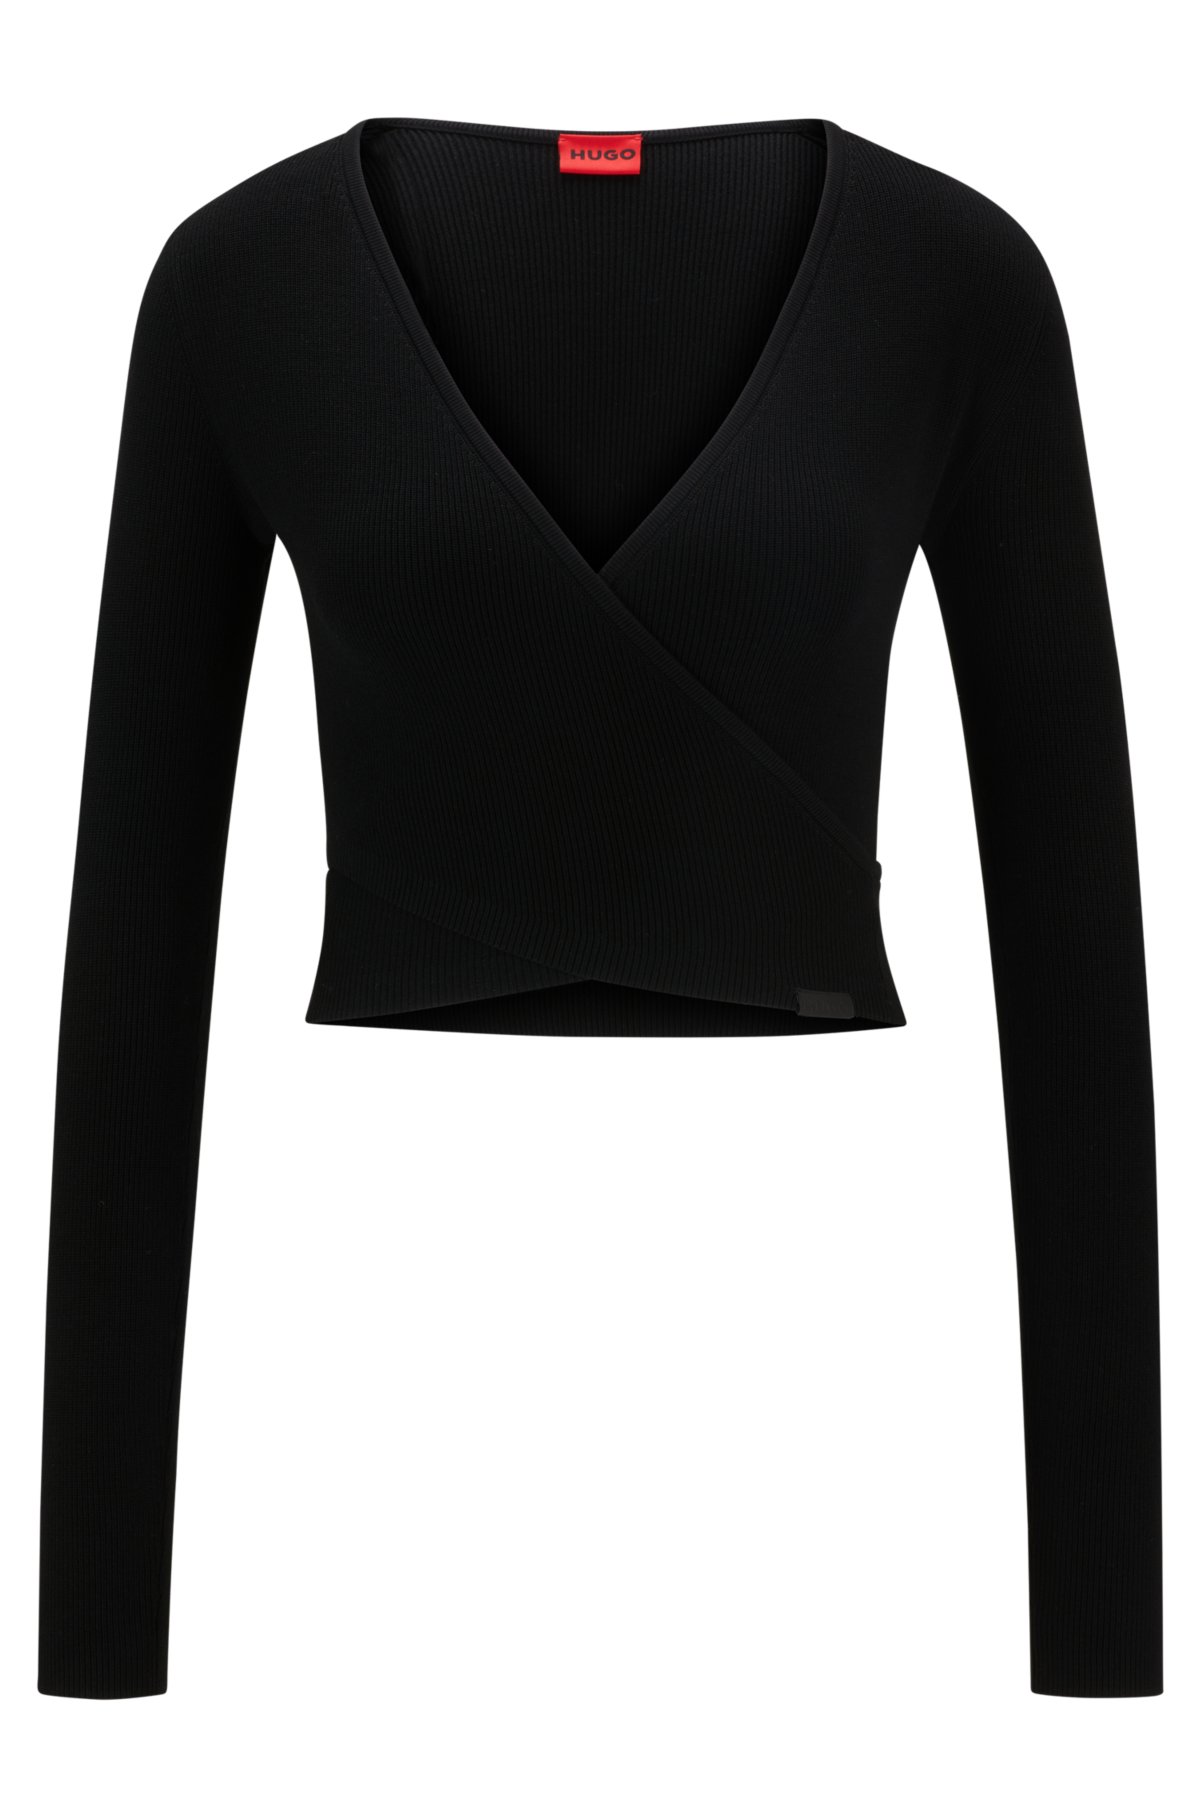 Wrap-effect crepe sweater with cut-out detail, Black